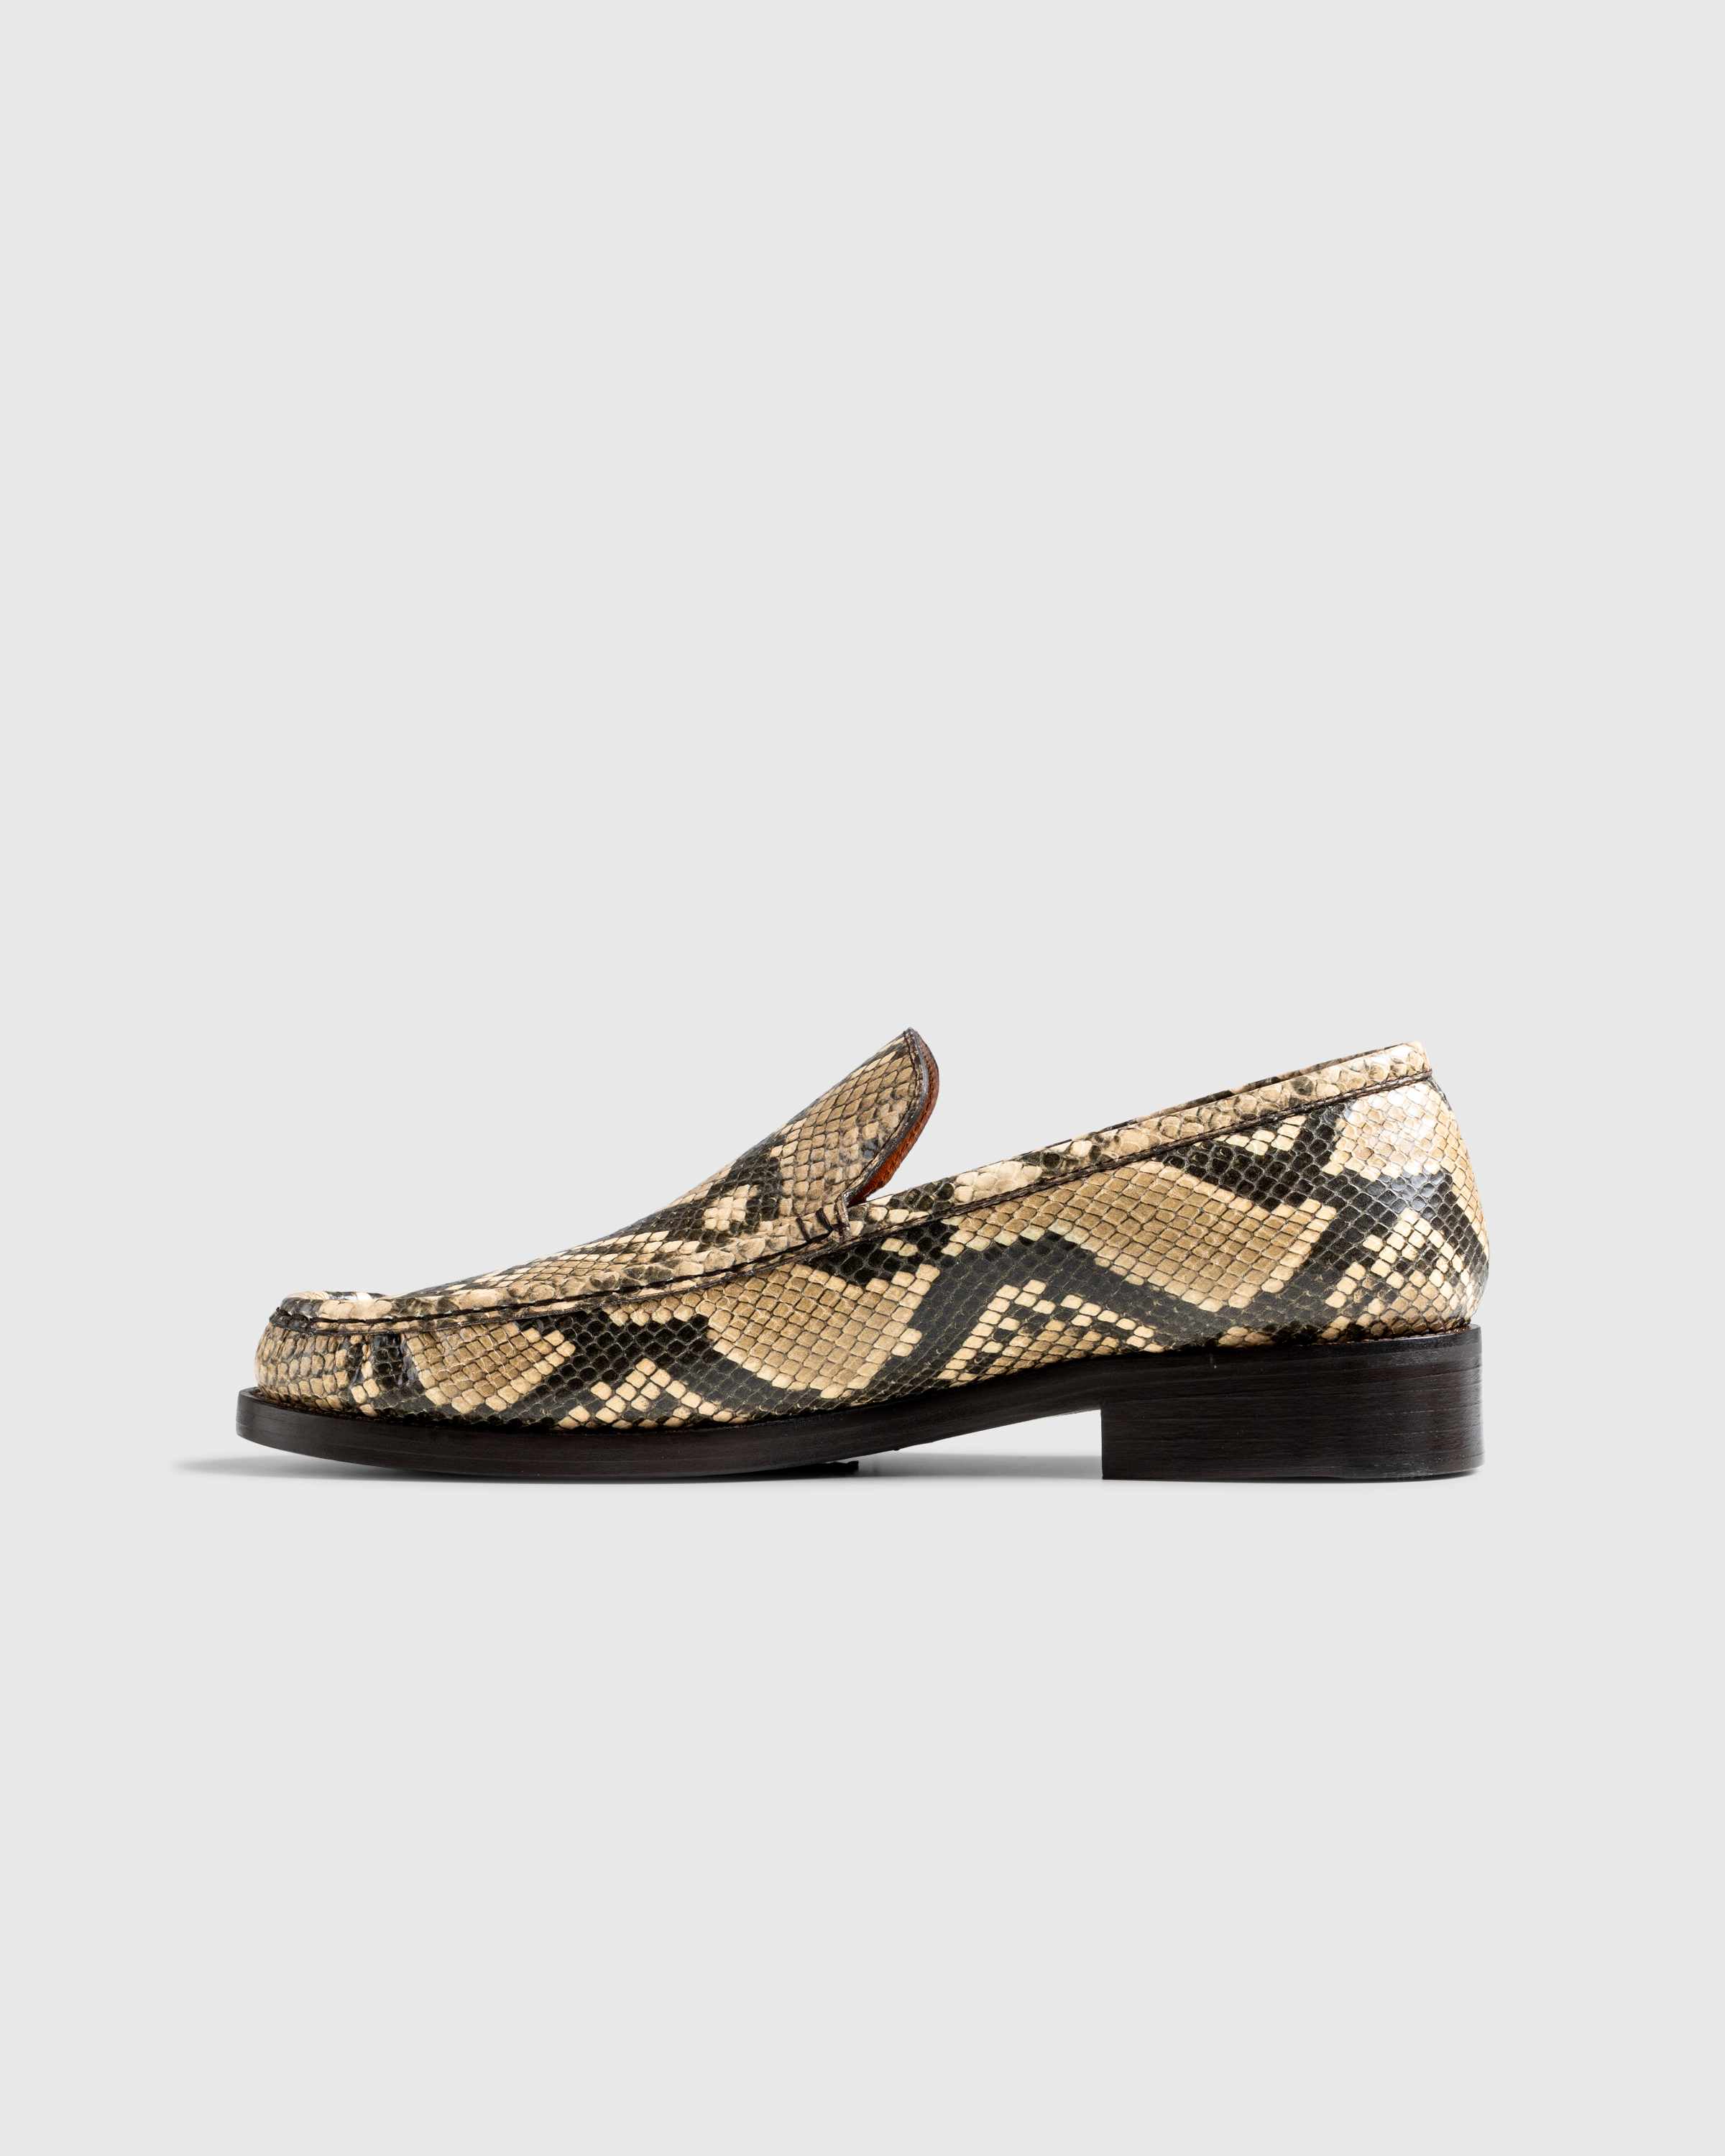 Acne Studios – Leather Loafers Beige - Sneakers - Beige - Image 2